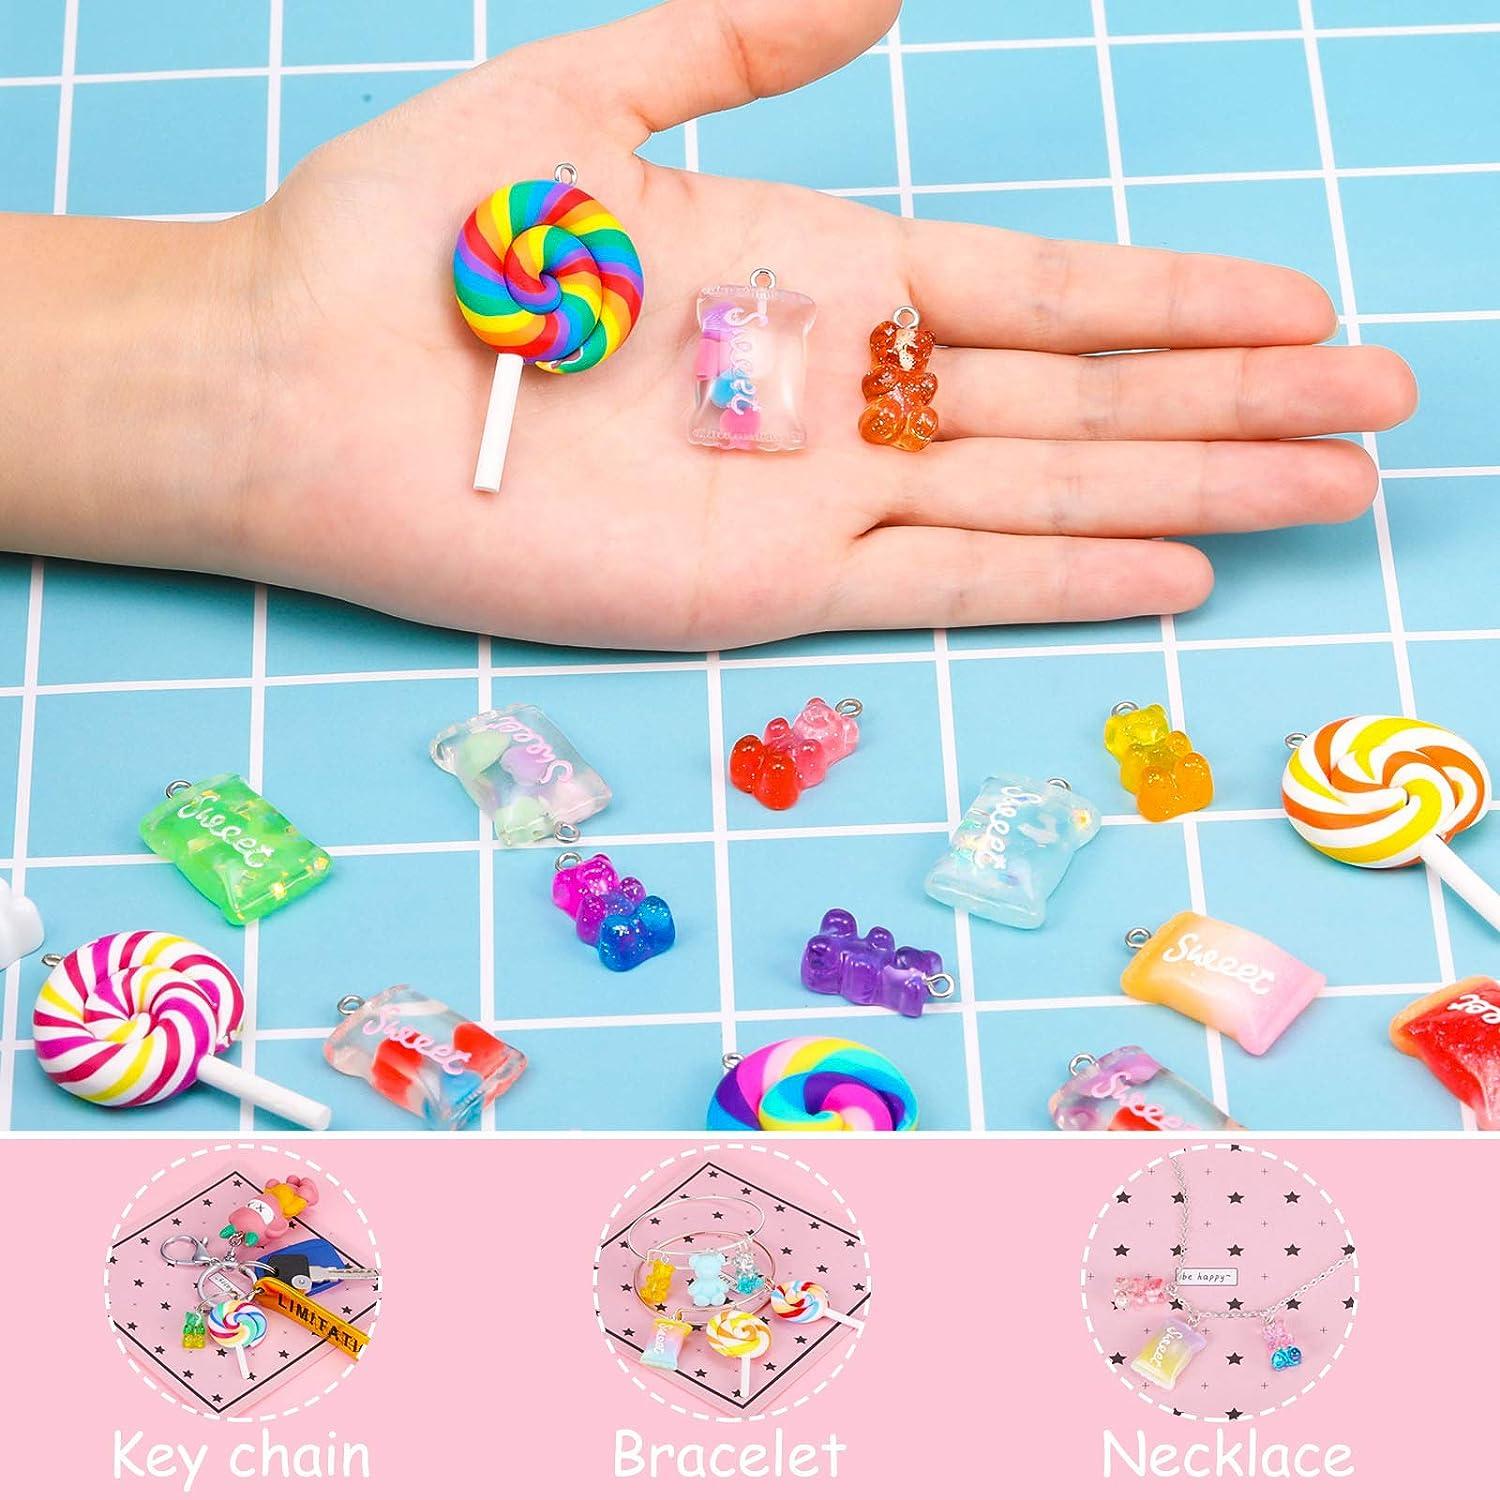 Candy Craft Kit- Candy Jewelry